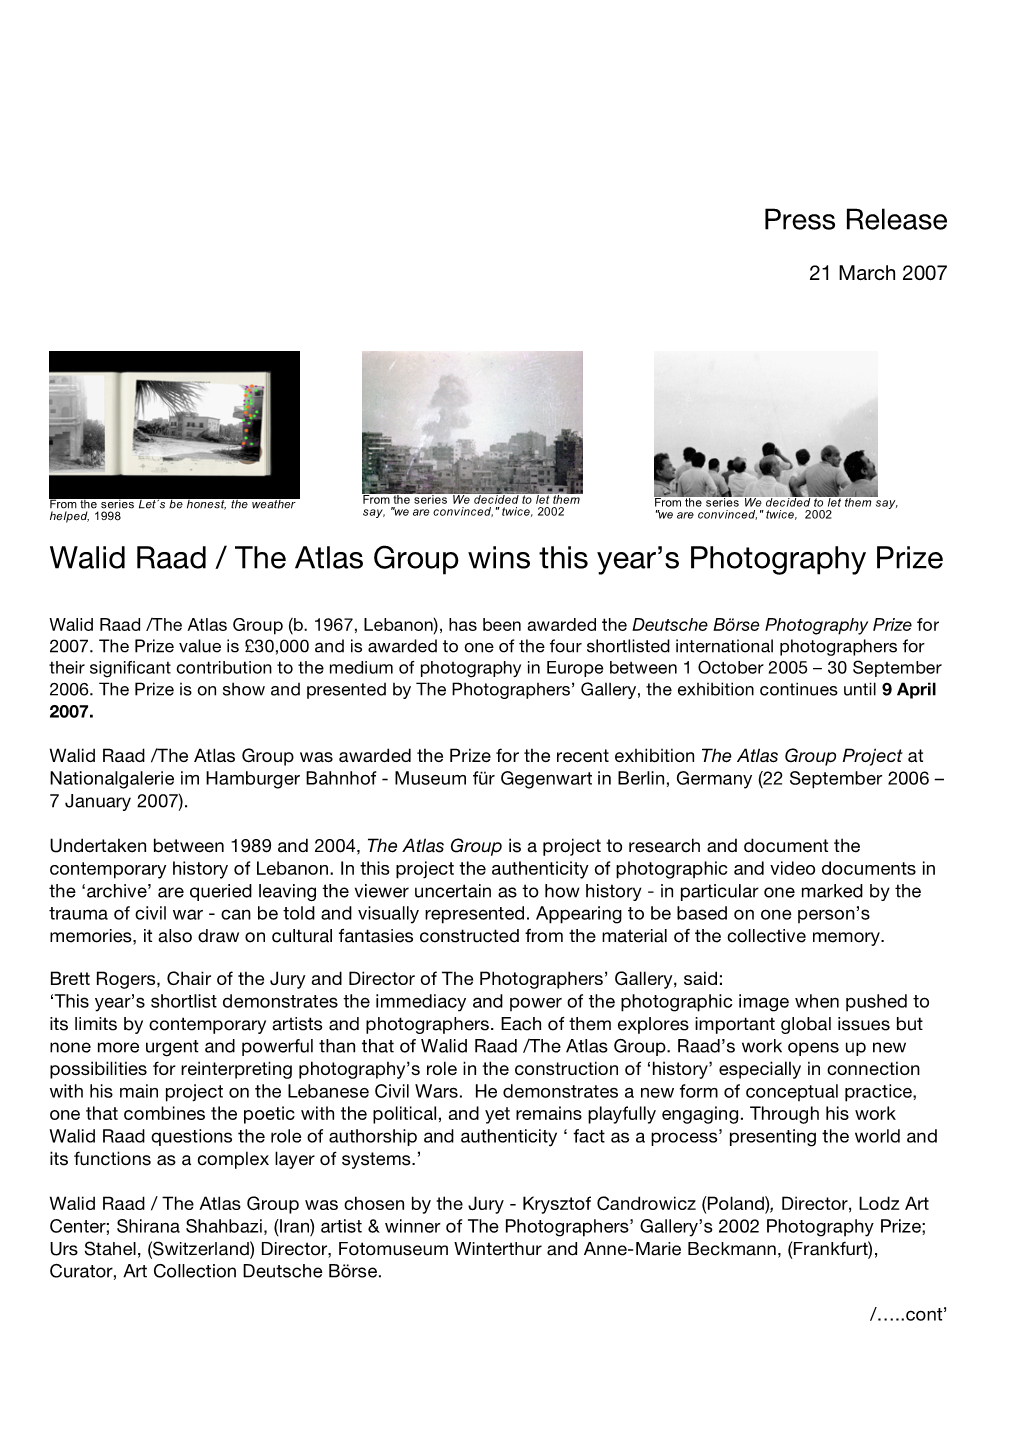 Walid Raad / the Atlas Group Wins This Year’S Photography Prize